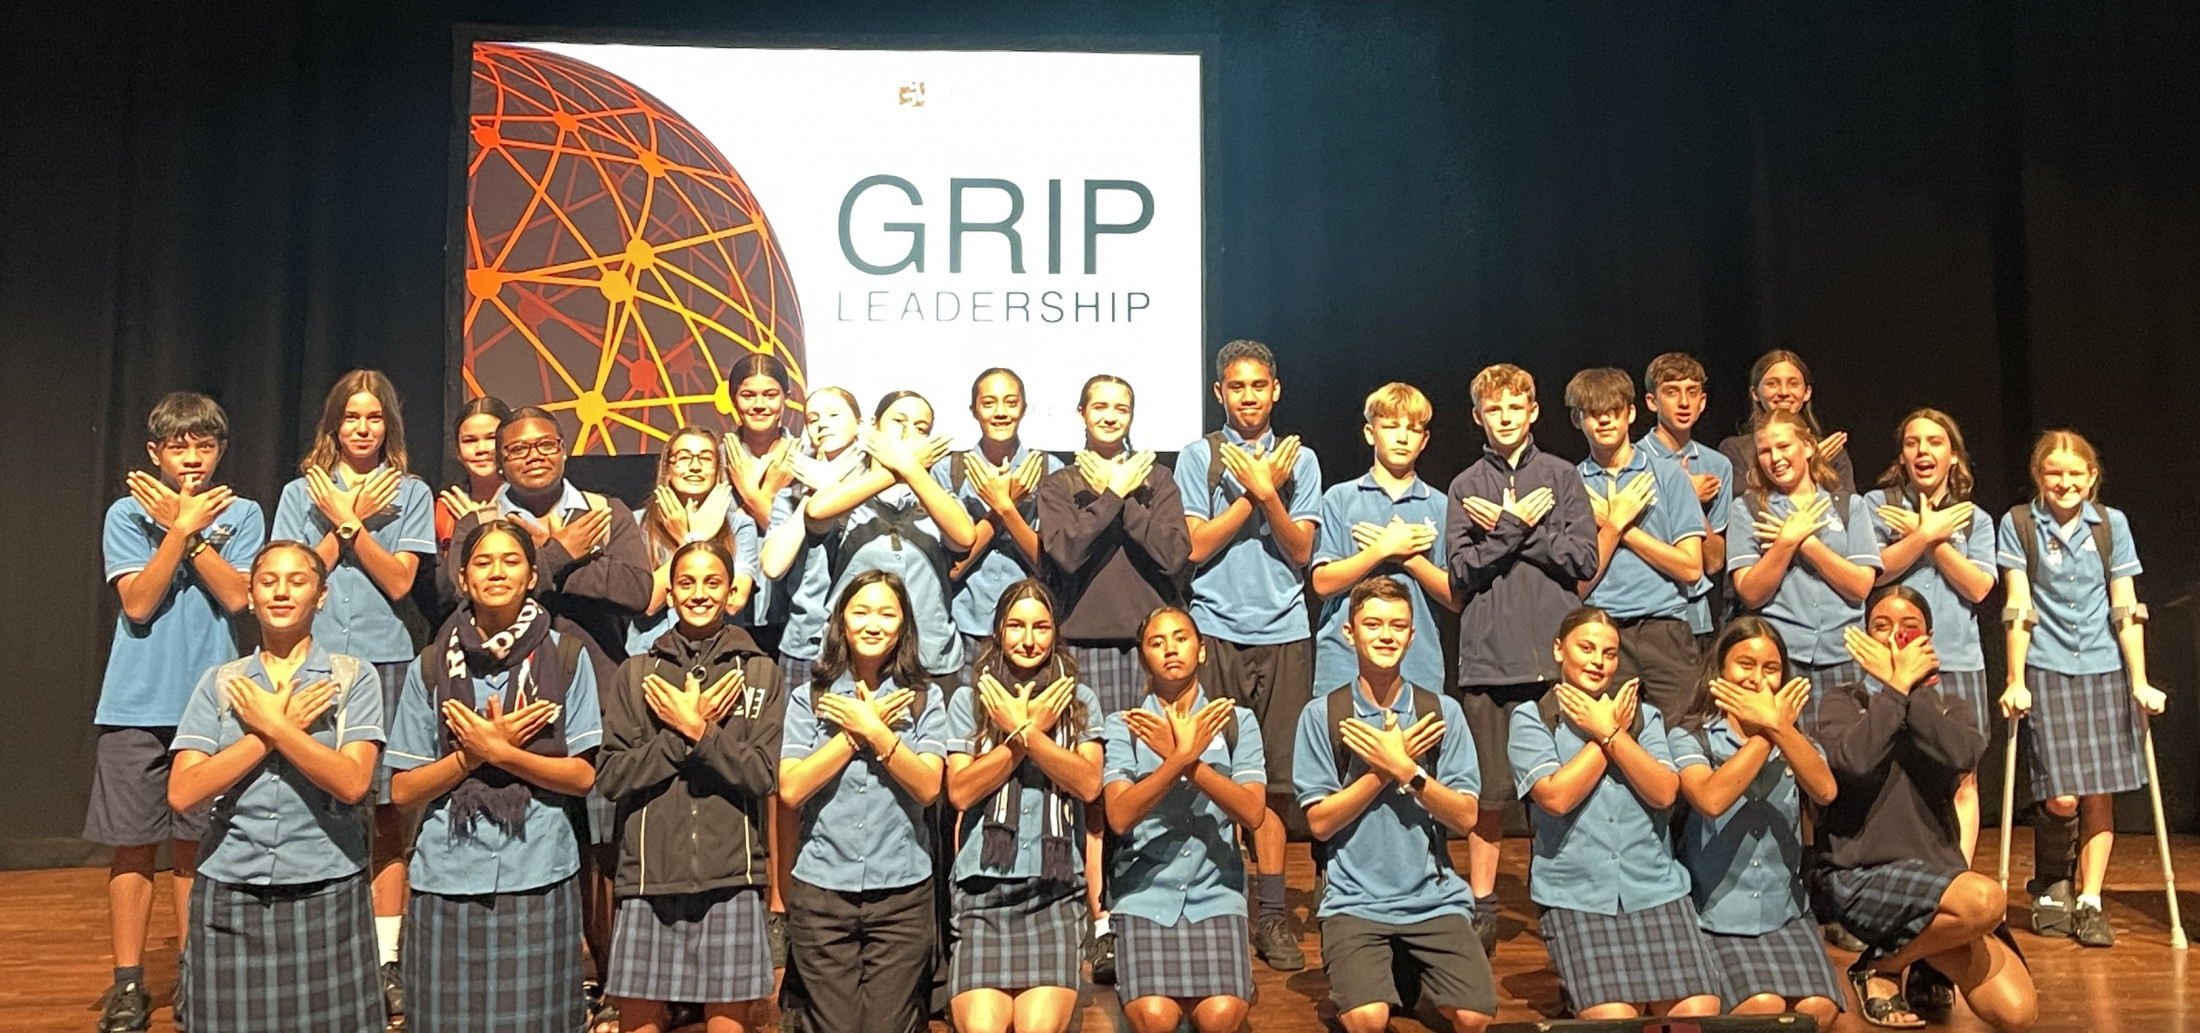 Grip Leadership Conference